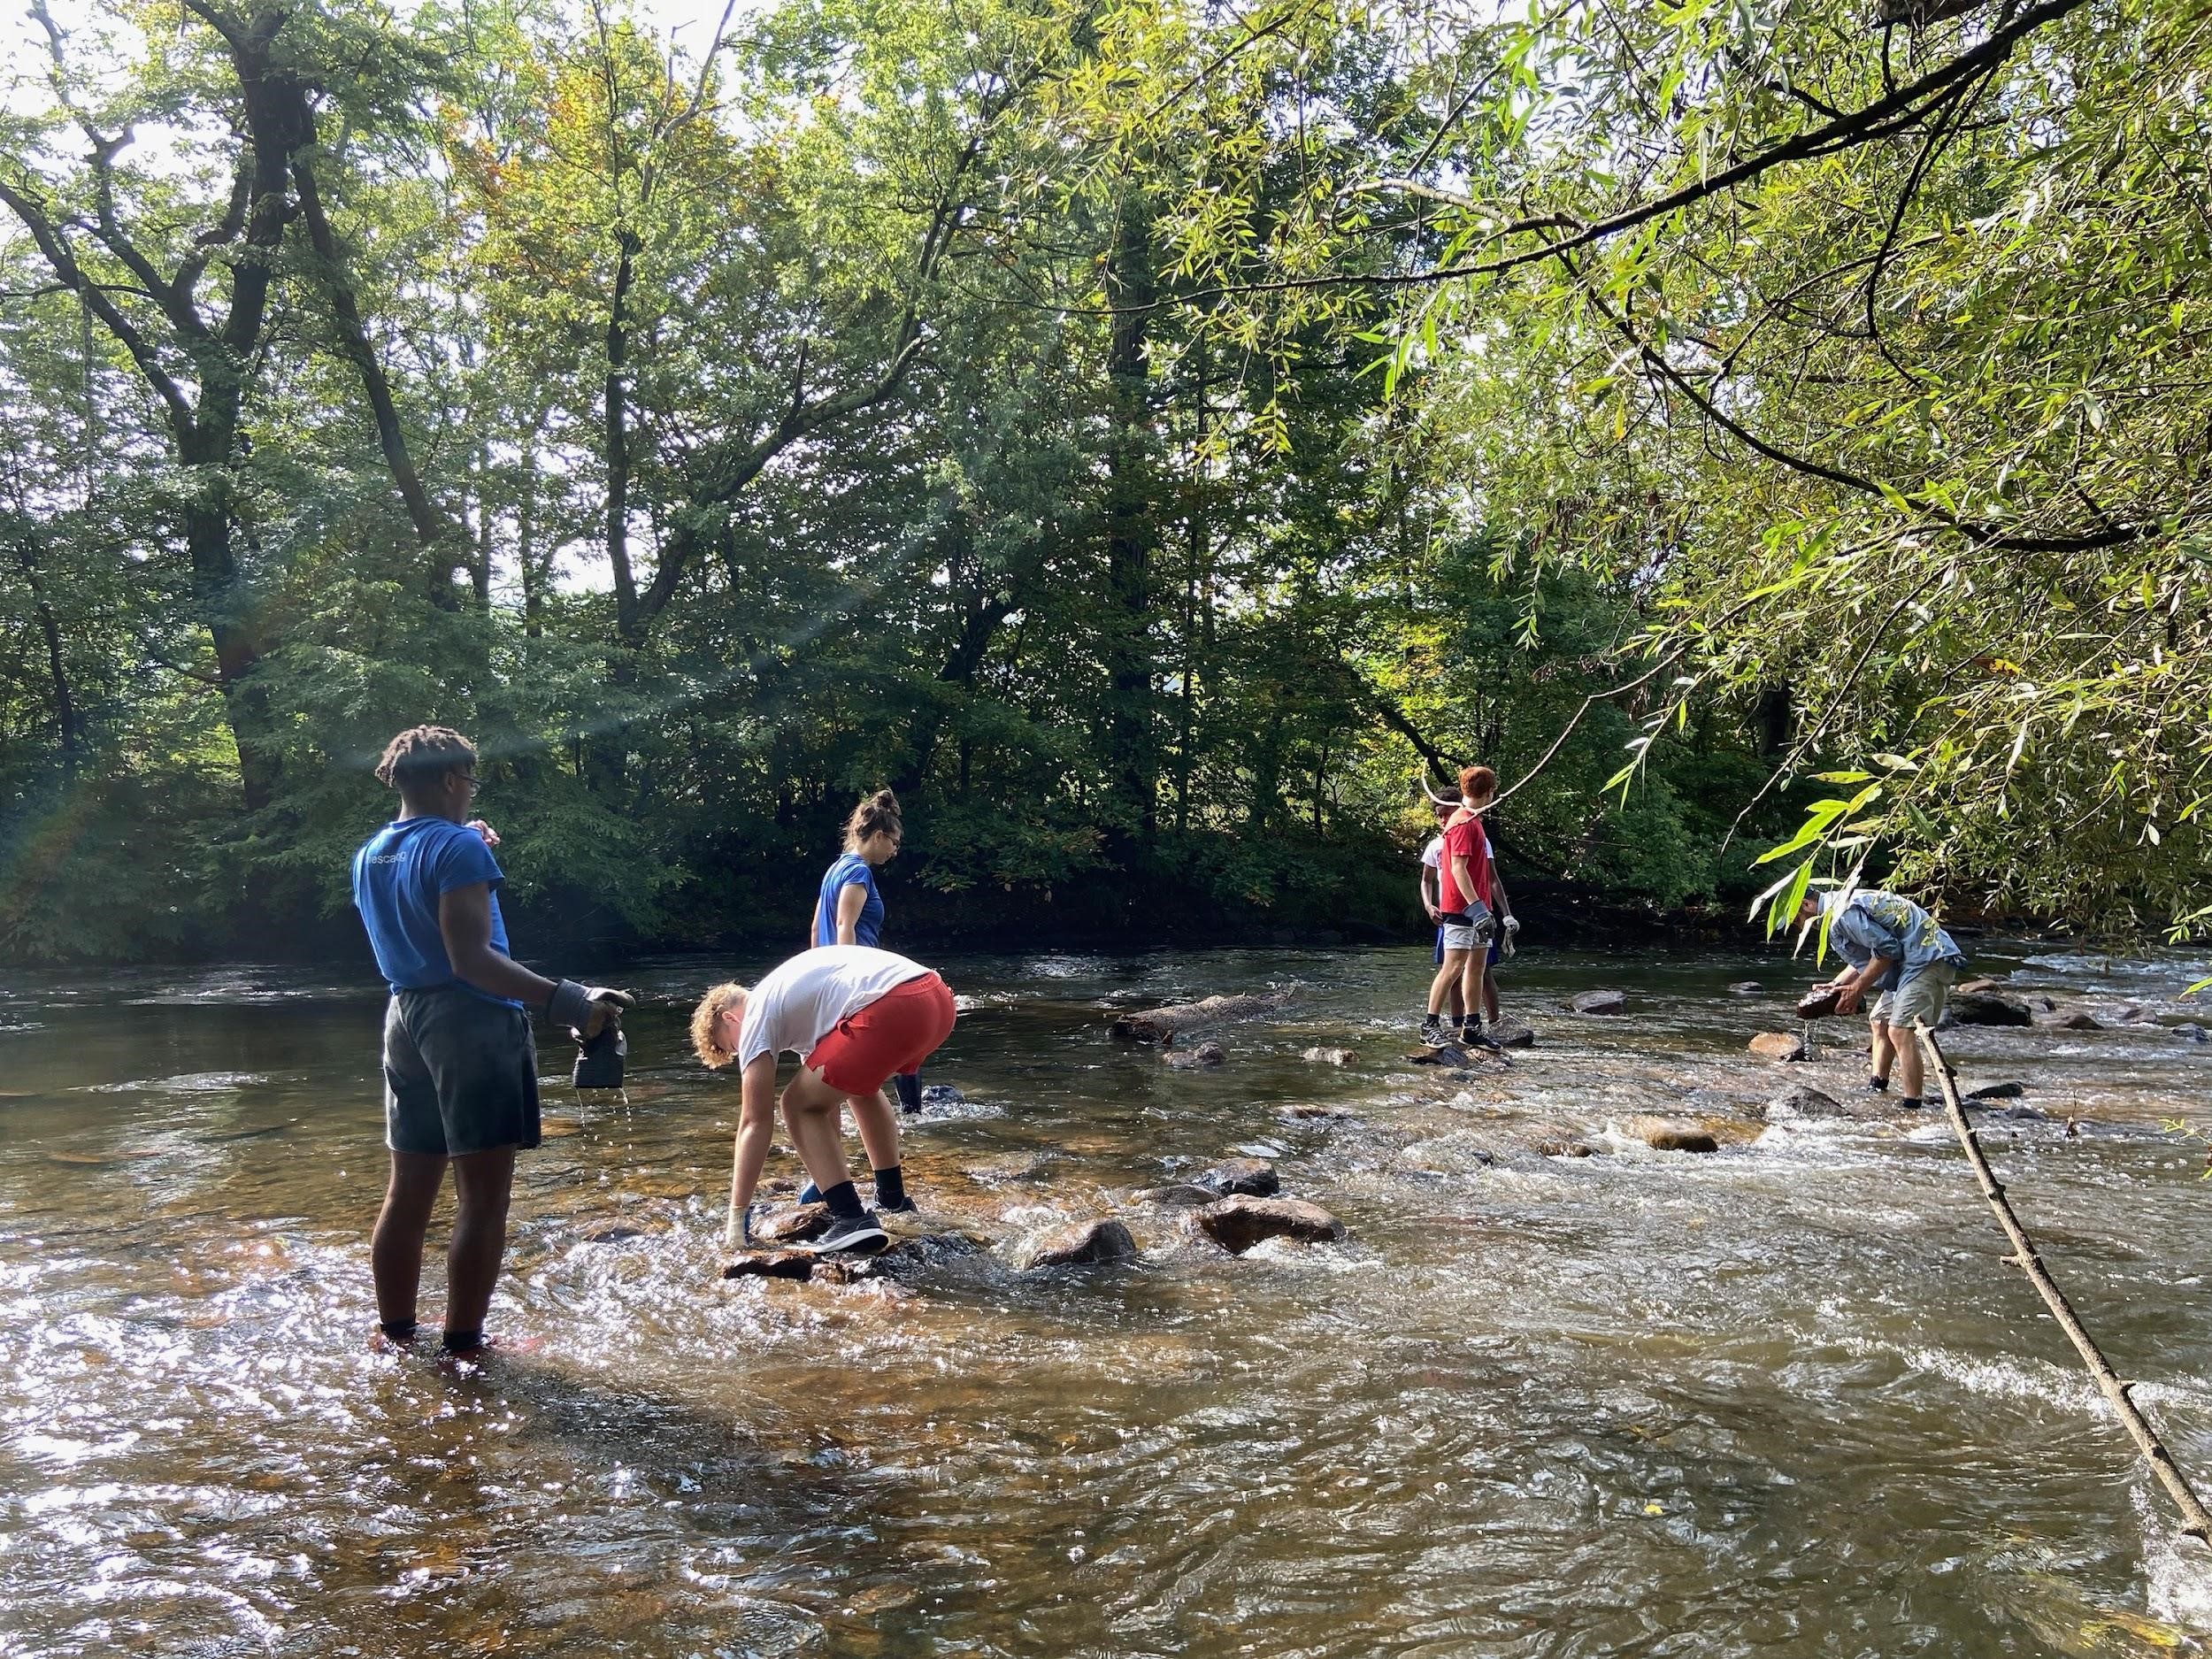 A group of people stand in a shallow river